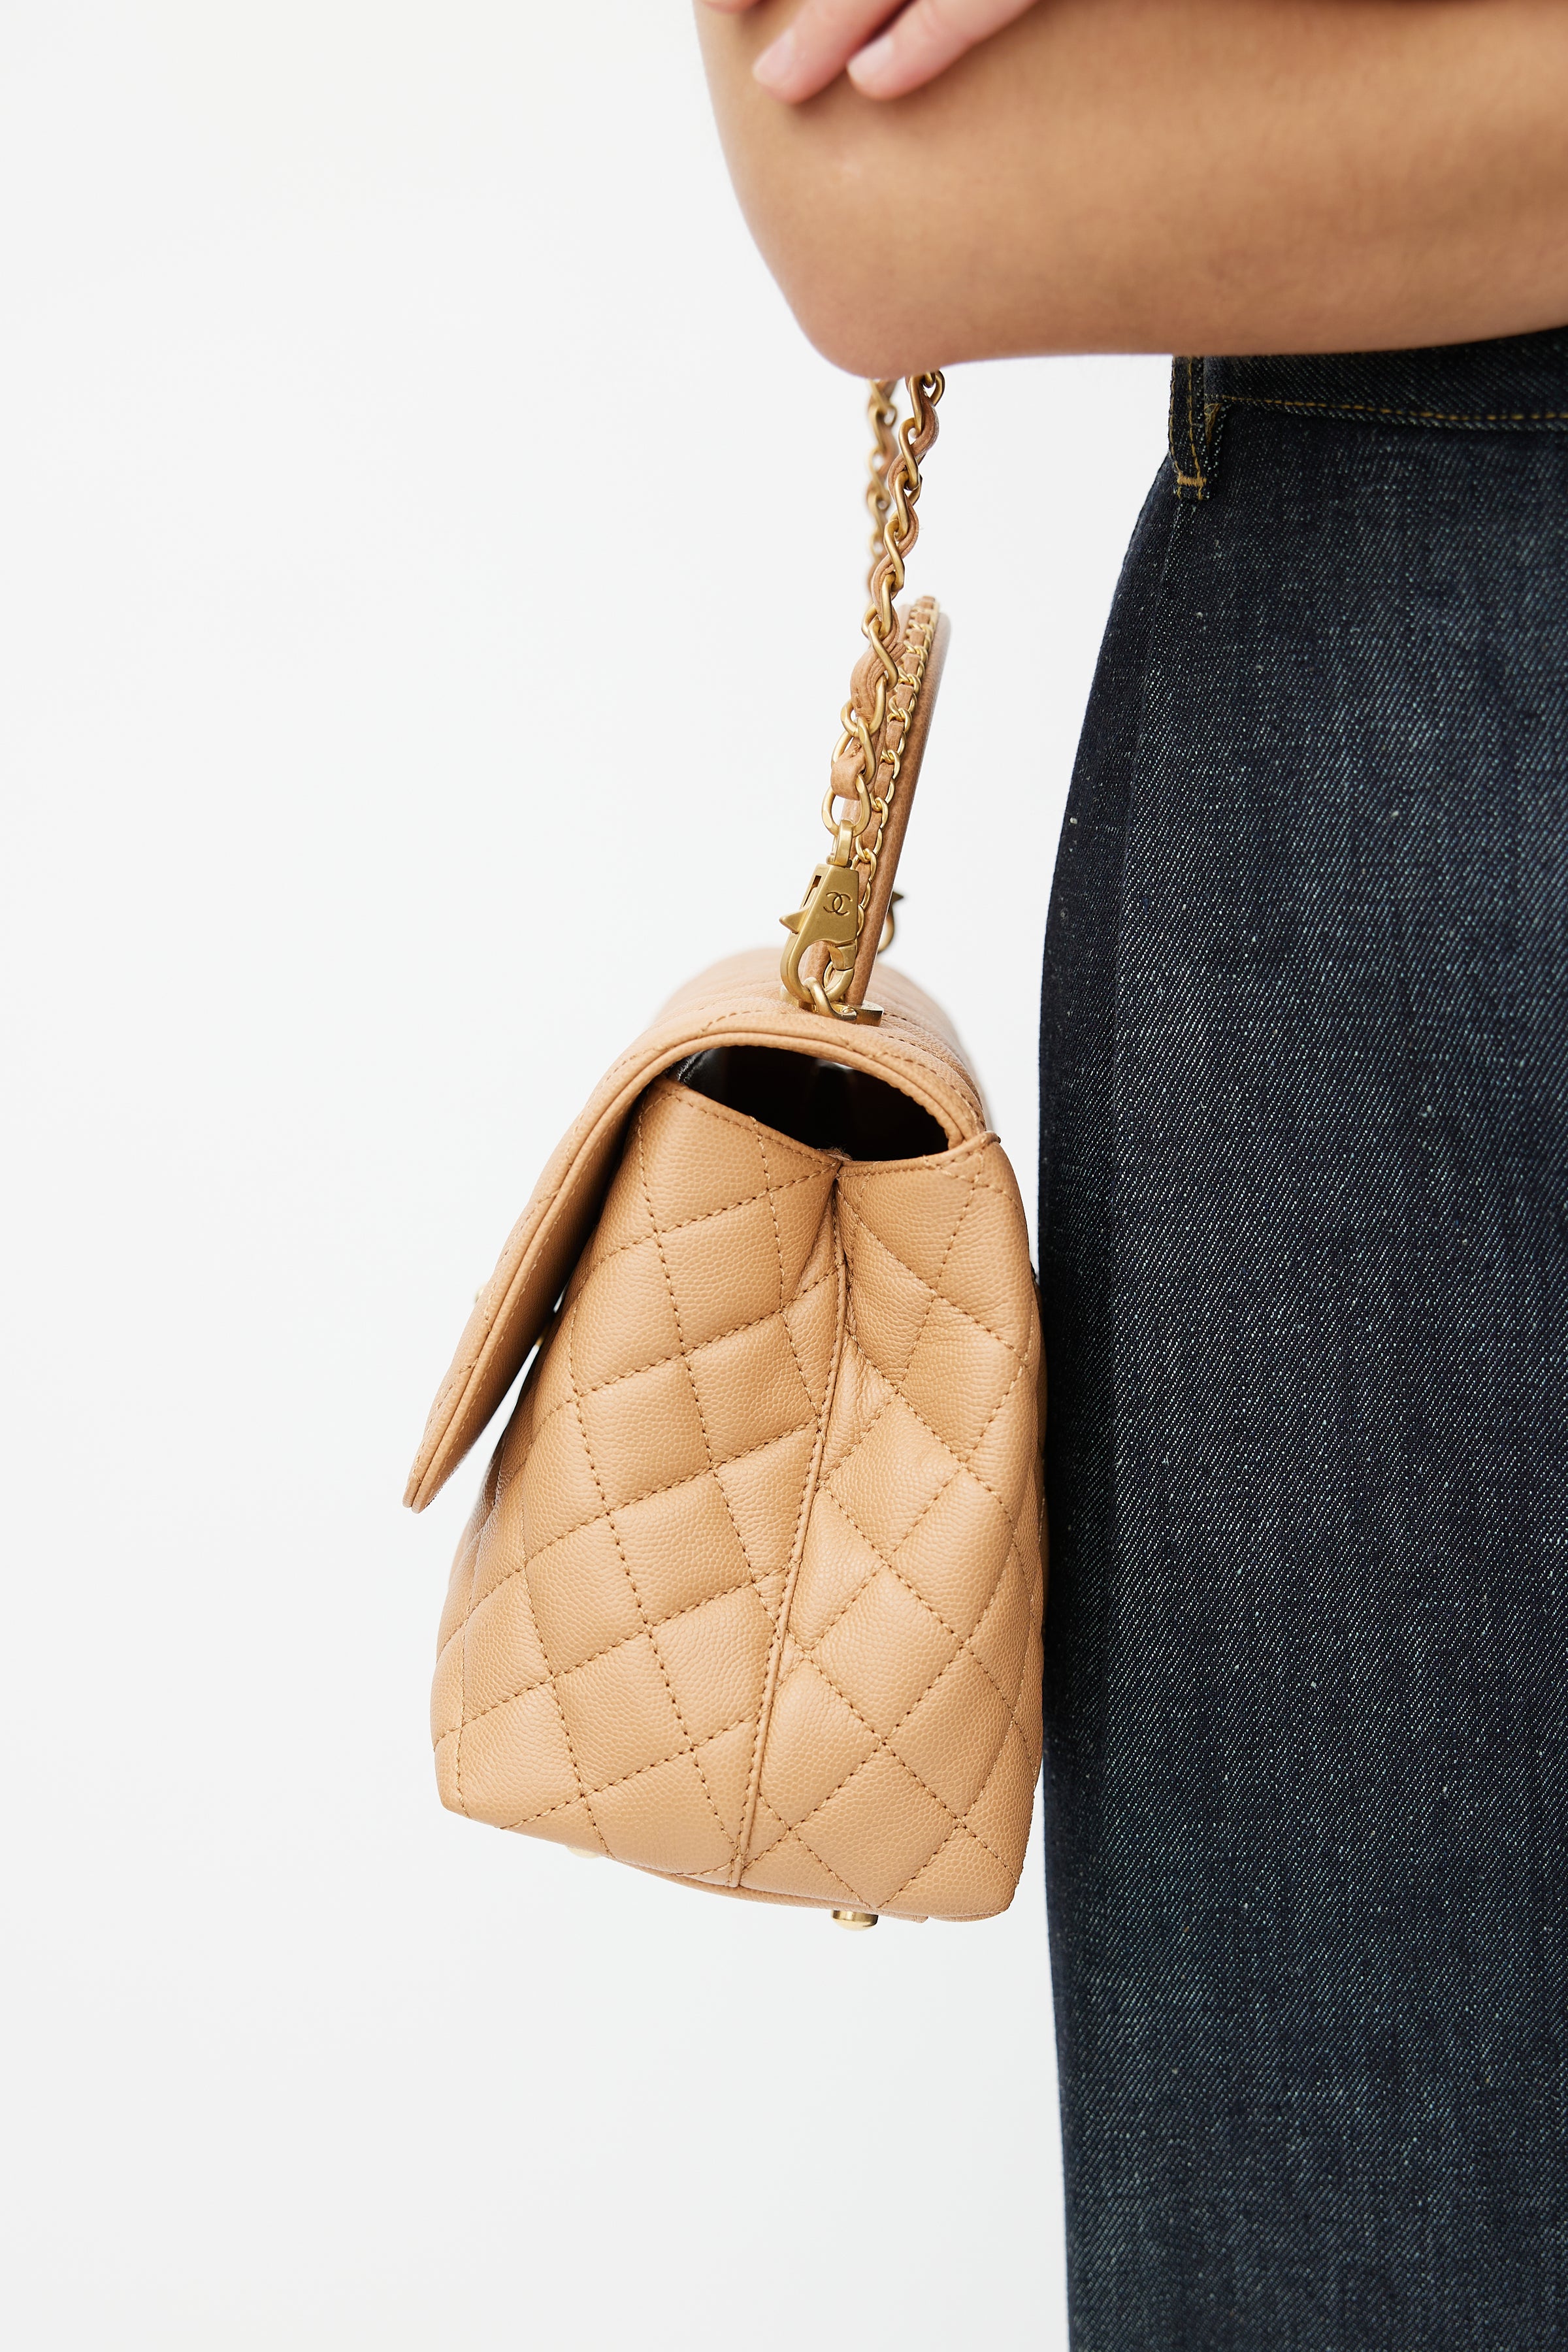 Chanel // Beige Quilted Leather Small Coco Bag – VSP Consignment